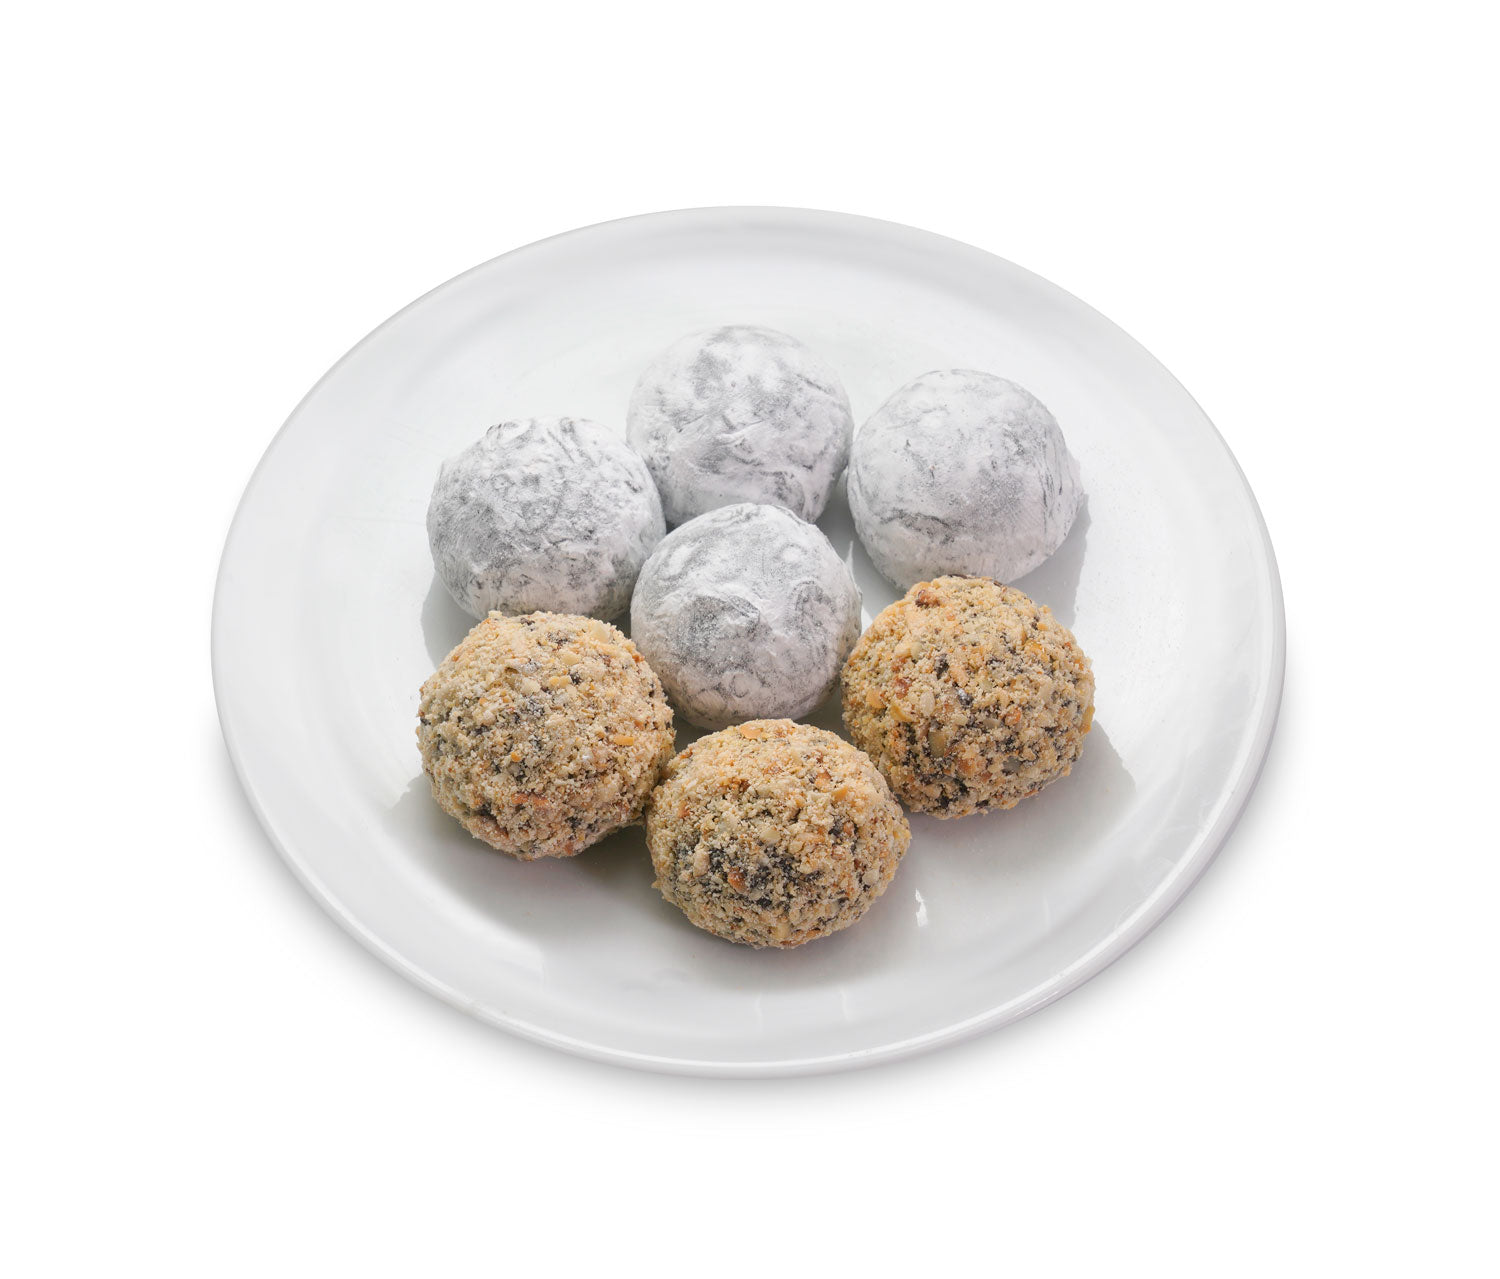 Champagne truffles in powdered sugar and Hazelnut truffles rolled in nuts